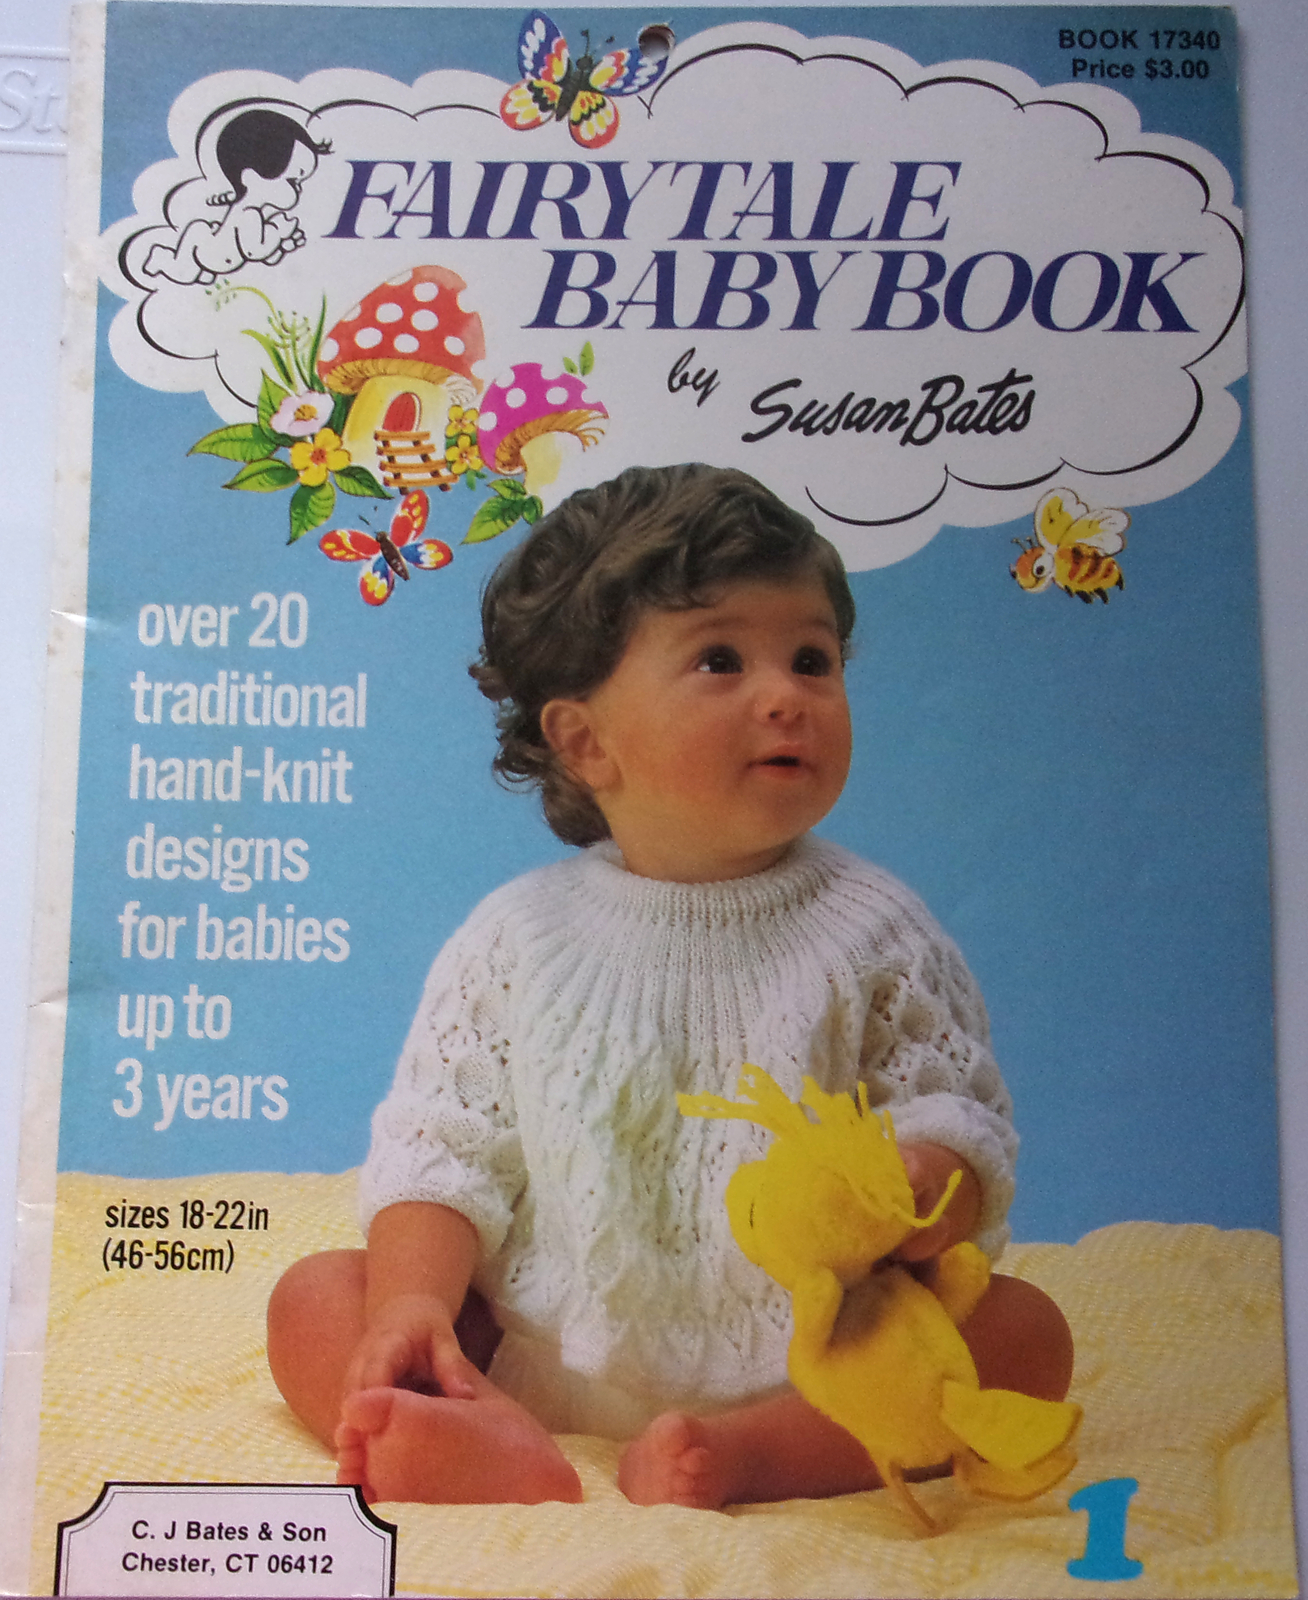 Fairy Tale Baby Book By Susan Bates 20 Traditional Hand Knit Designs - $4.99